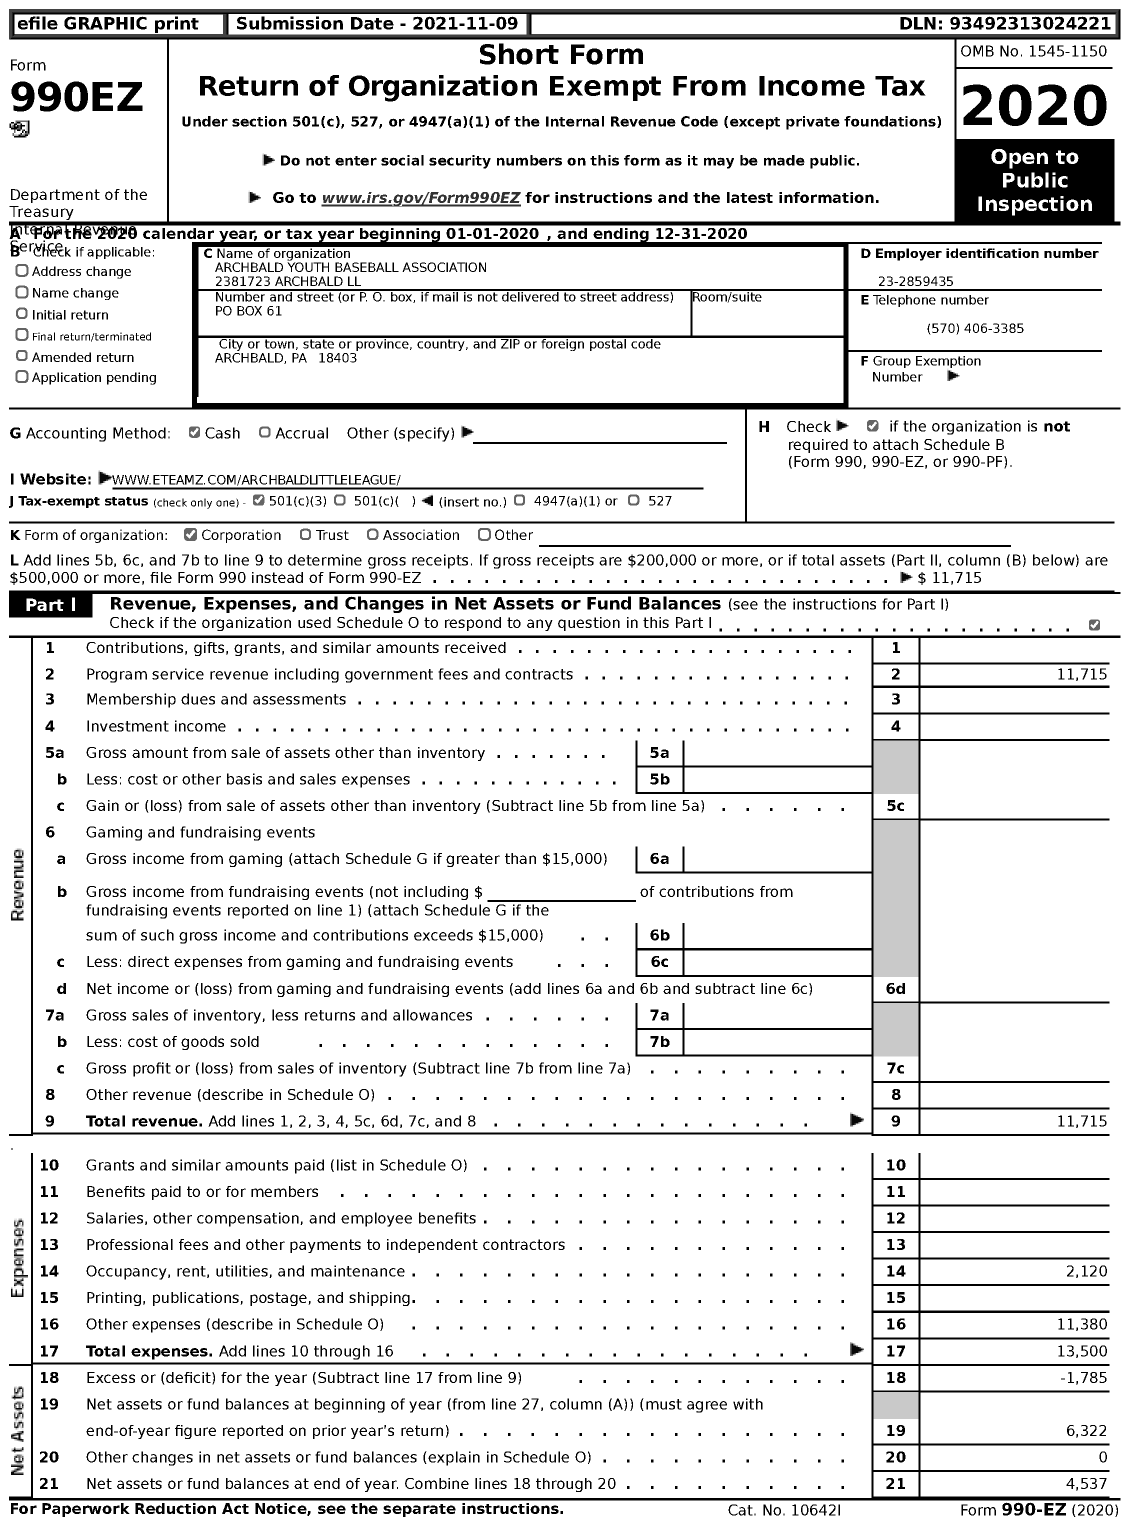 Image of first page of 2020 Form 990EZ for Little League Baseball - 2381723 Archbald LL